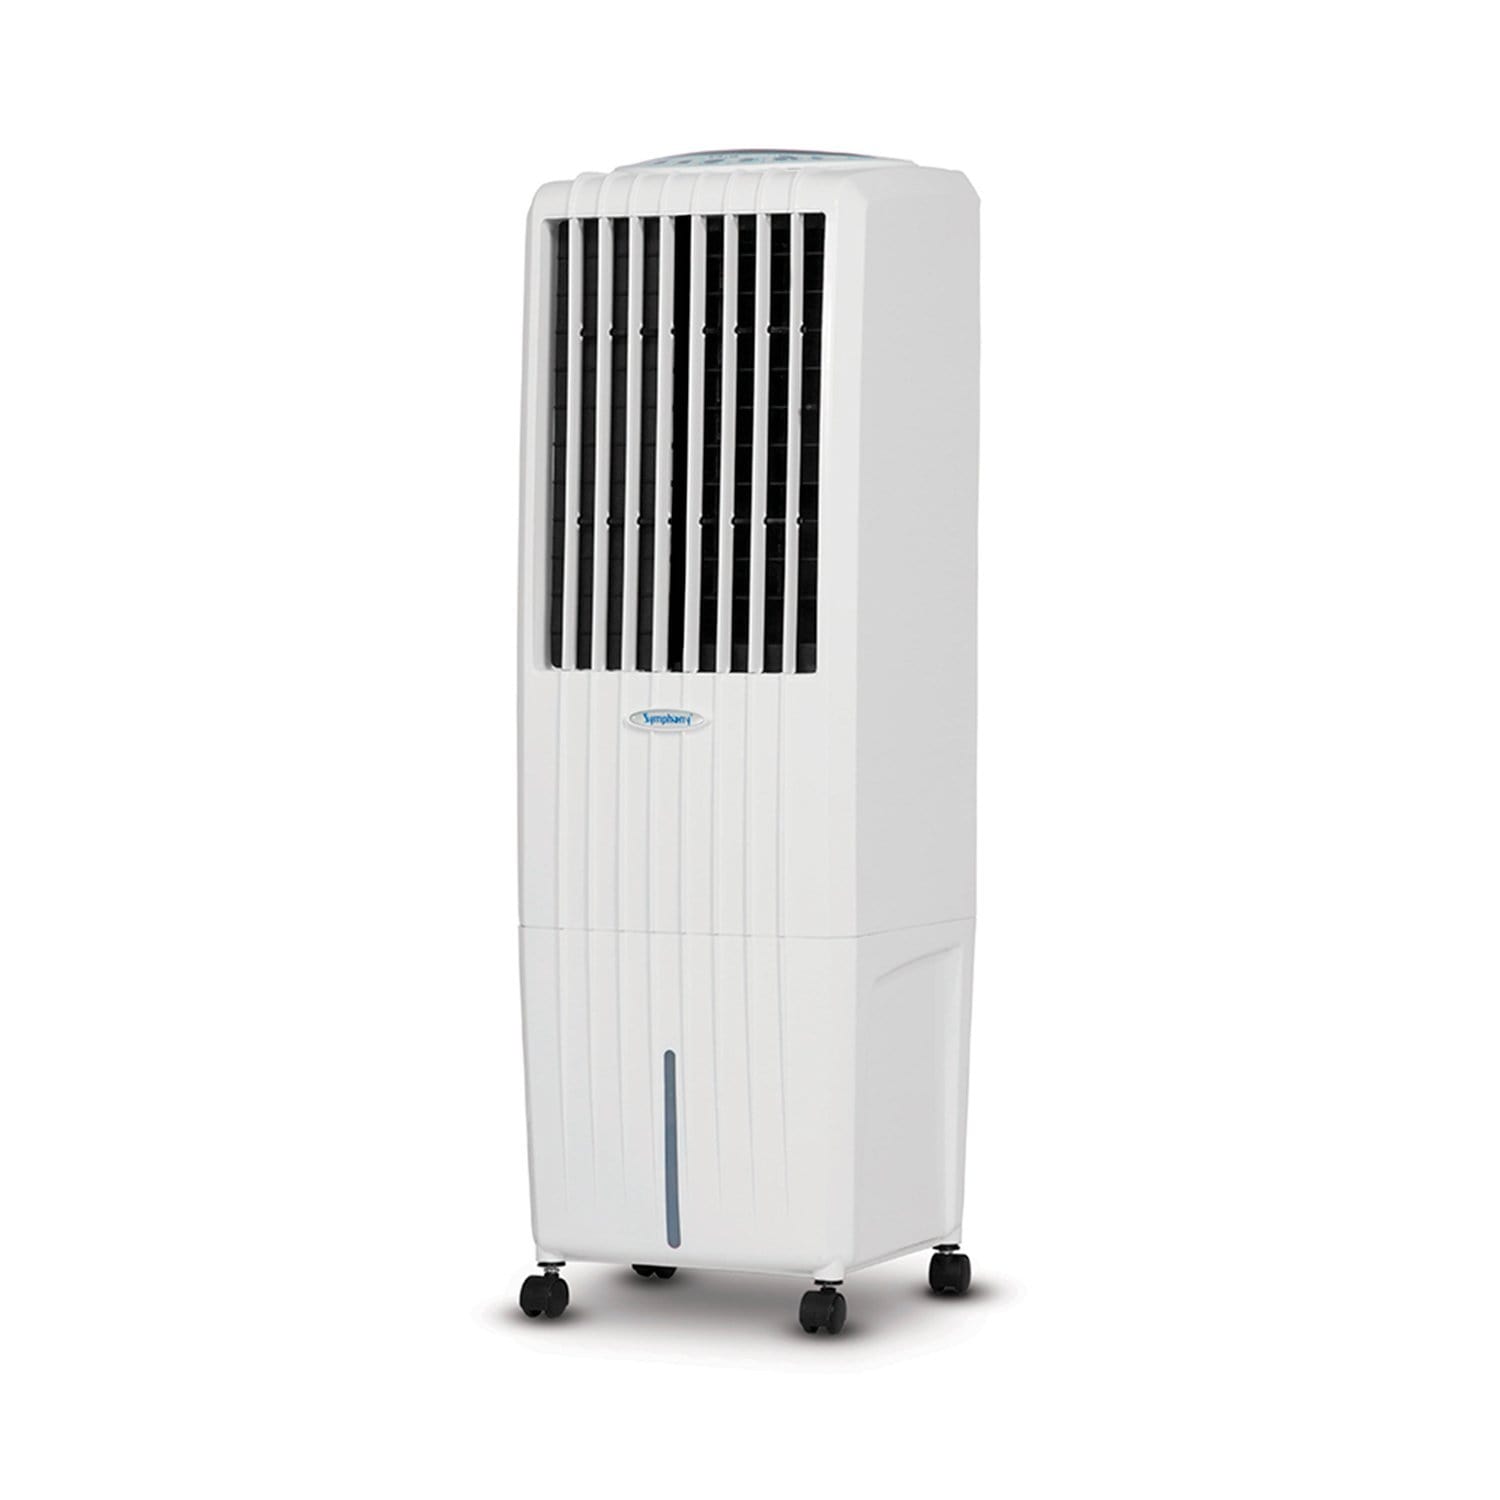 Symphony Diet 22i 22 Litre Air Cooler with Remote Control (White) - KITCHEN MART